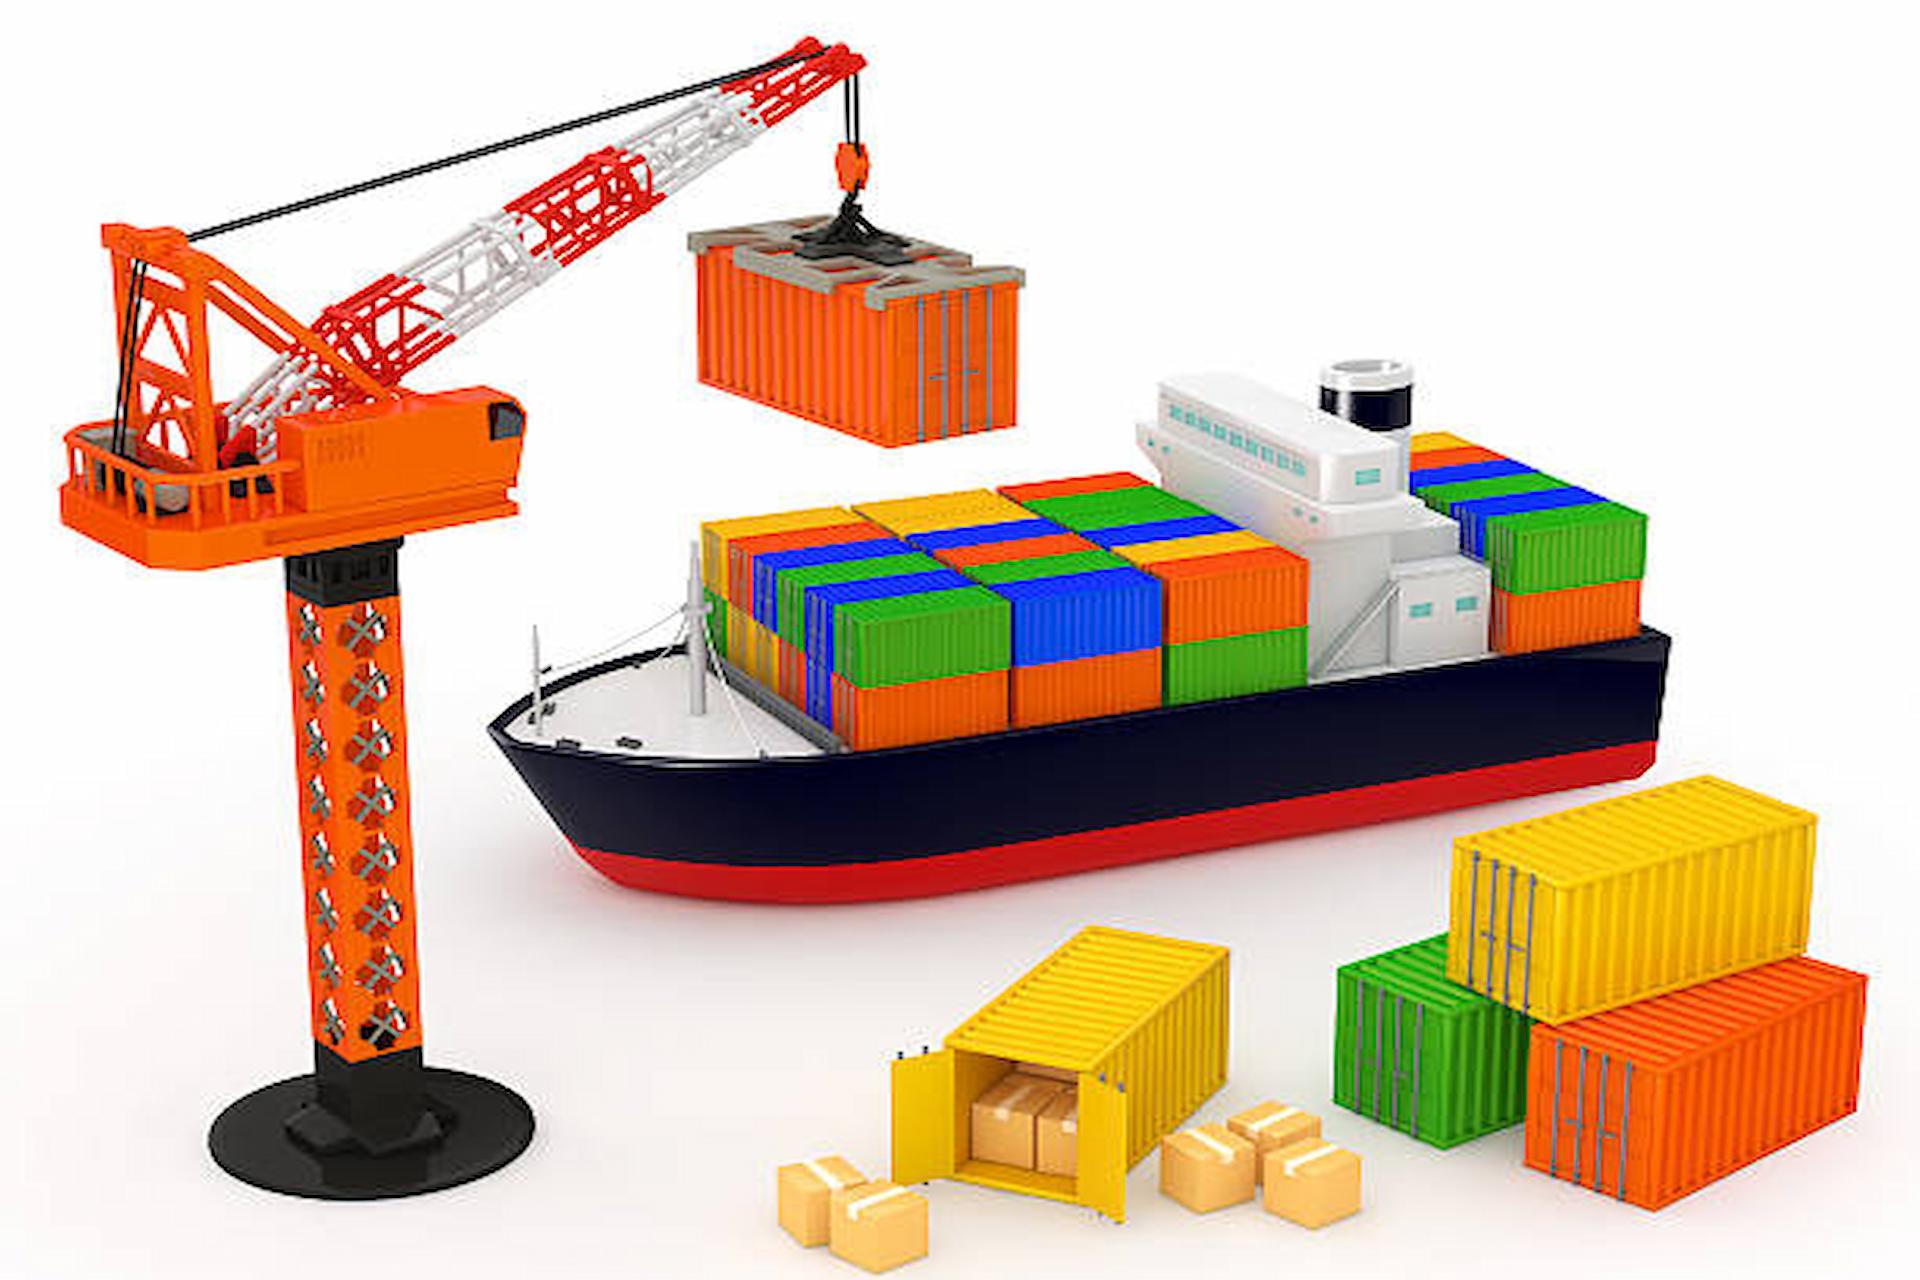 Crane V.S Forklift- What To Choose For Container Lifting?